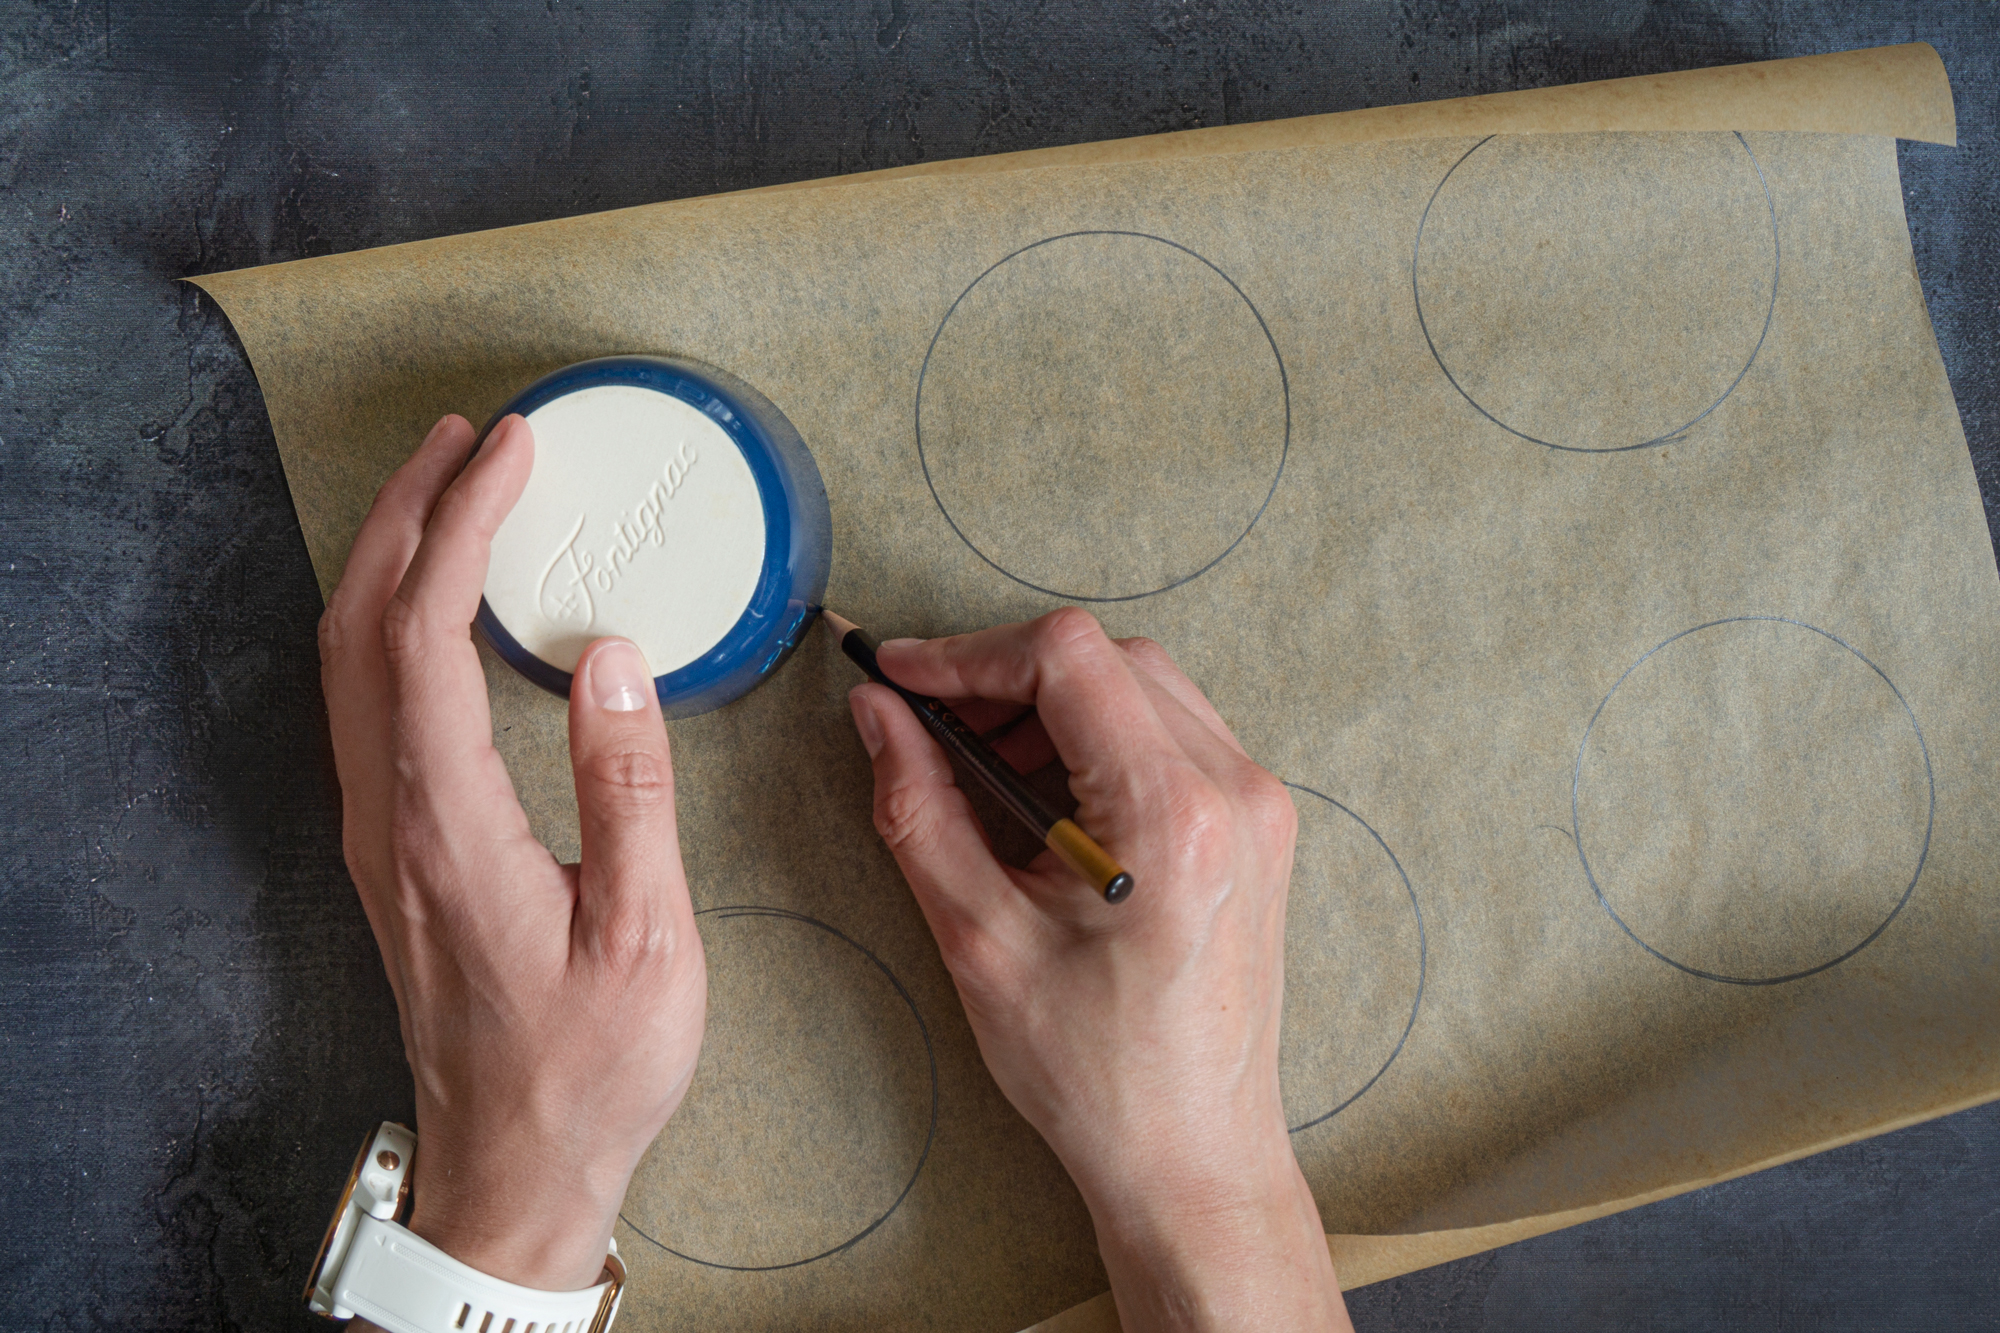 Draw six circles on a parchment paper